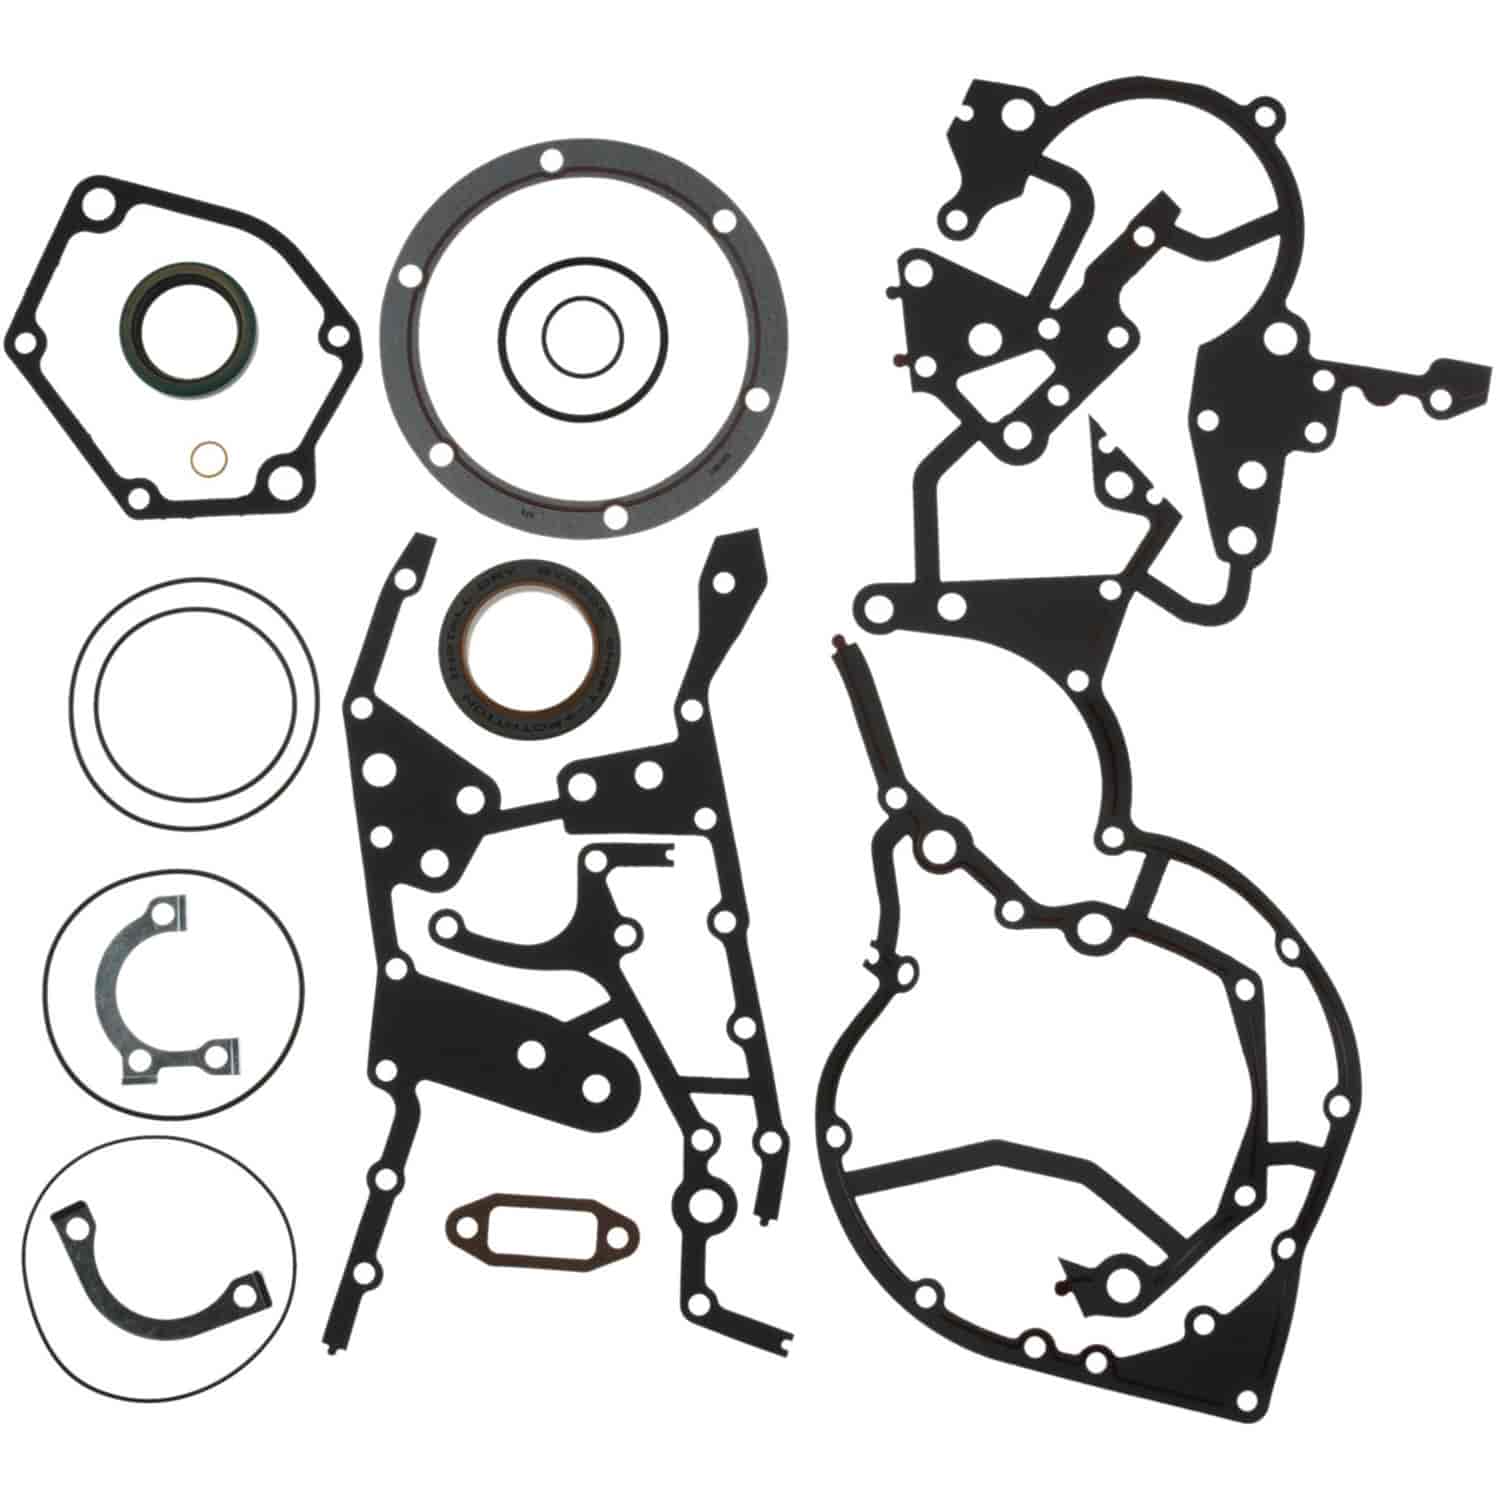 Timing Cover Set Caterpillar 3304 and 3306 Engines